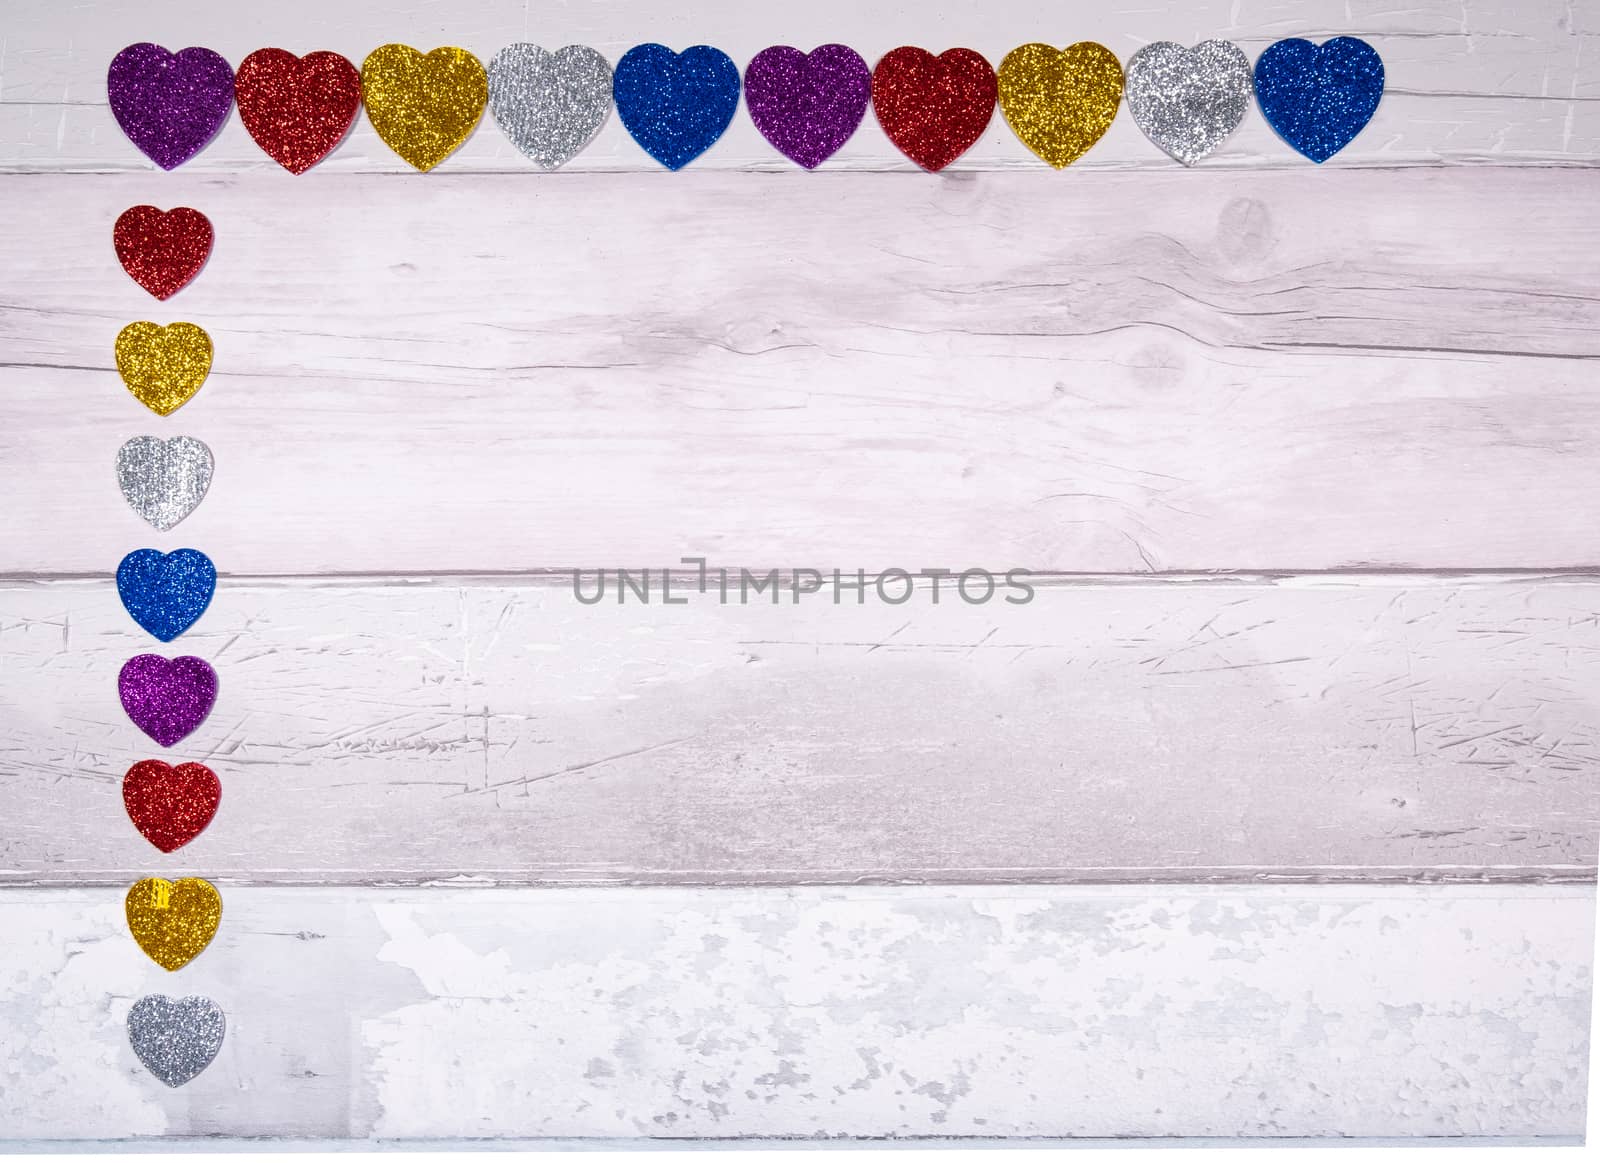 Hearts with glitter of all colors on a background of old wooden planks resembling an old parquet floor. Concept of valentines day and love in general.